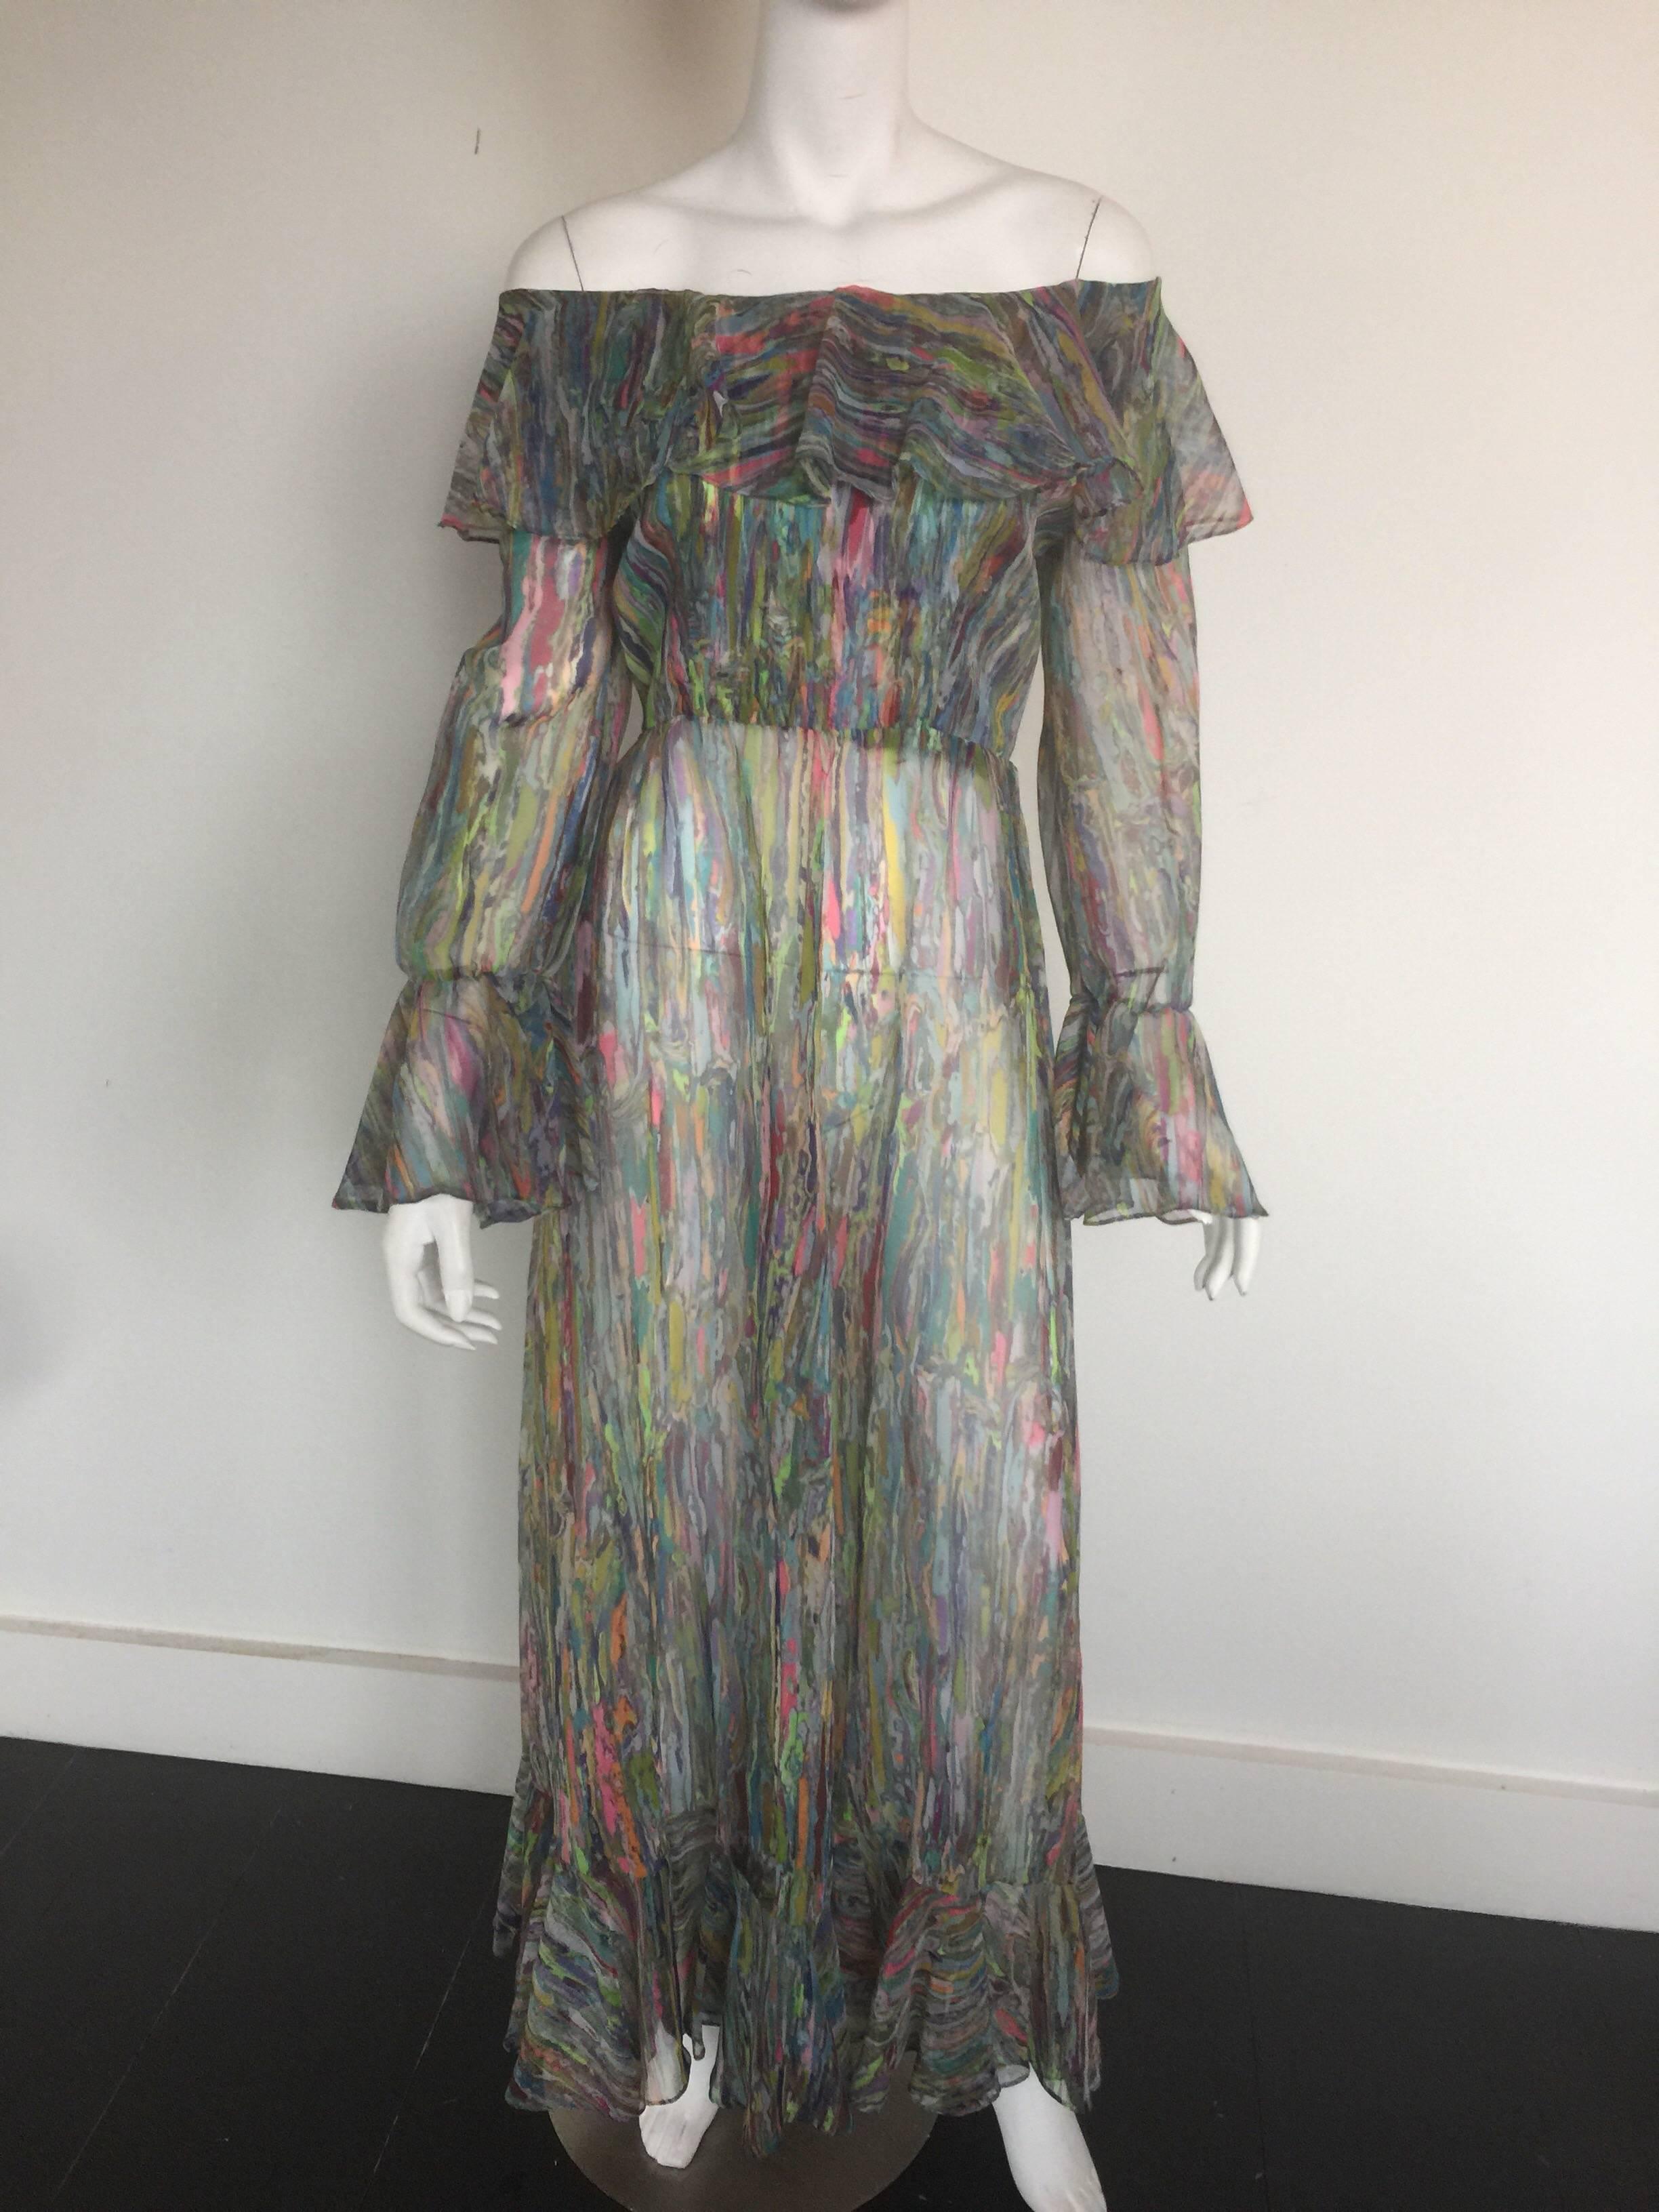 An original Multi colored wood grain Maxi dress with a boat neckline and a beautiful ruffle along the top which covers most of the top. Long poet sleeves with a high waist set on to a long skirt ending with ruffles located on the hemline.The dress